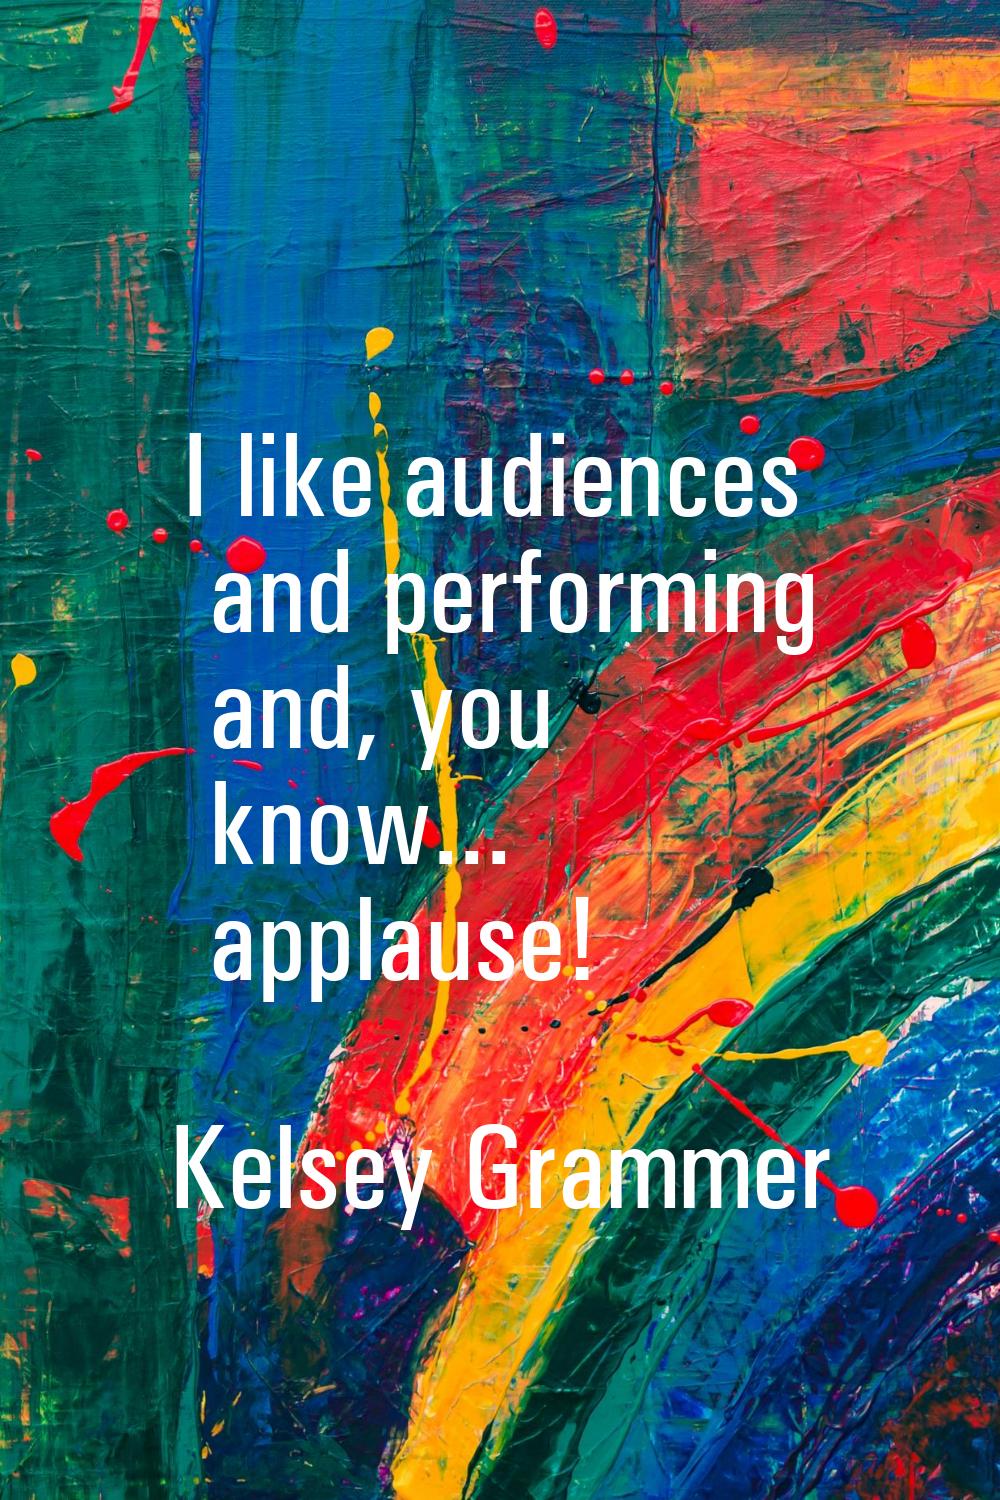 I like audiences and performing and, you know... applause!